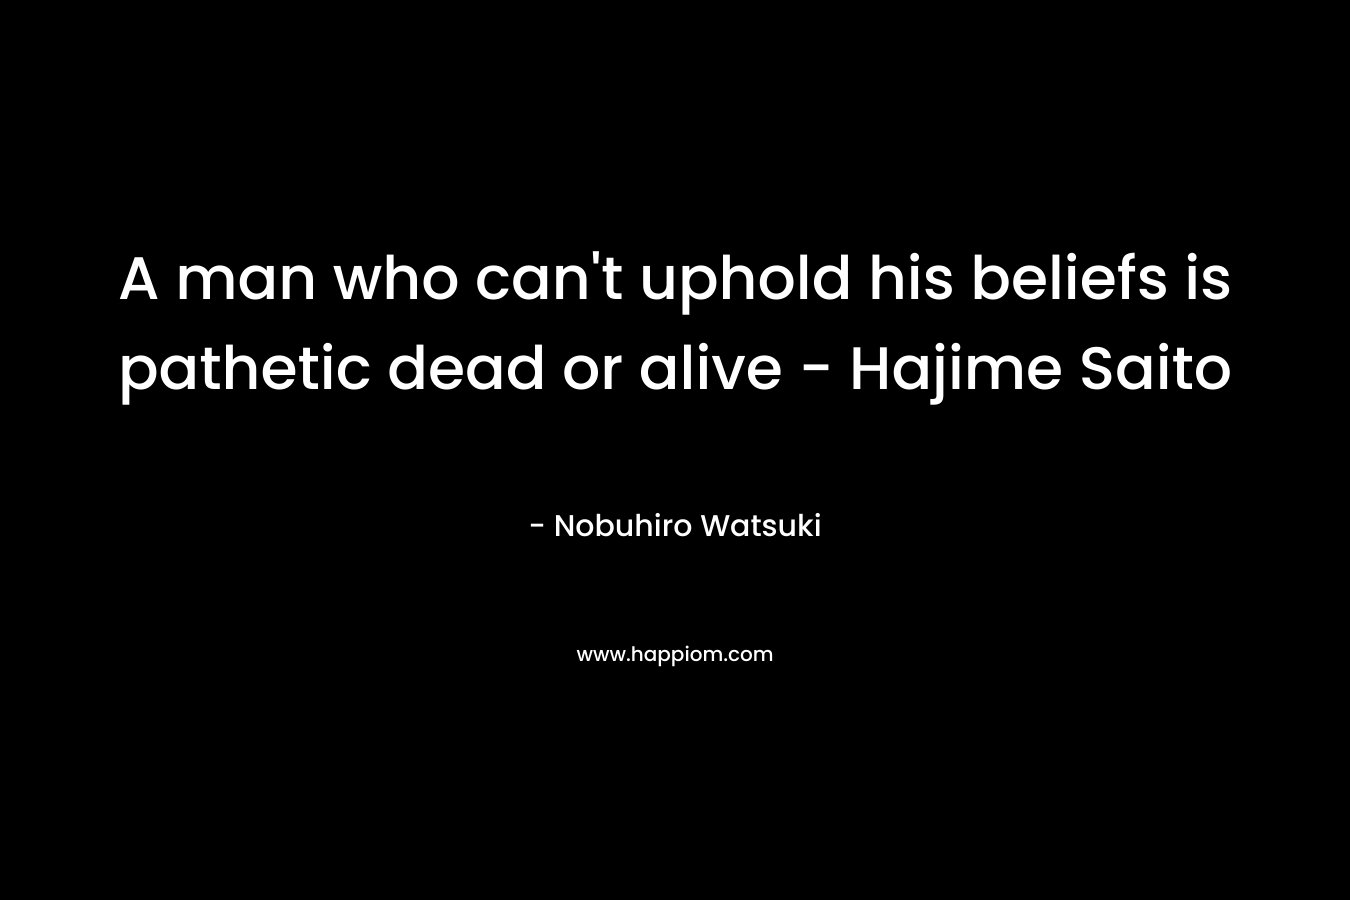 A man who can't uphold his beliefs is pathetic dead or alive - Hajime Saito